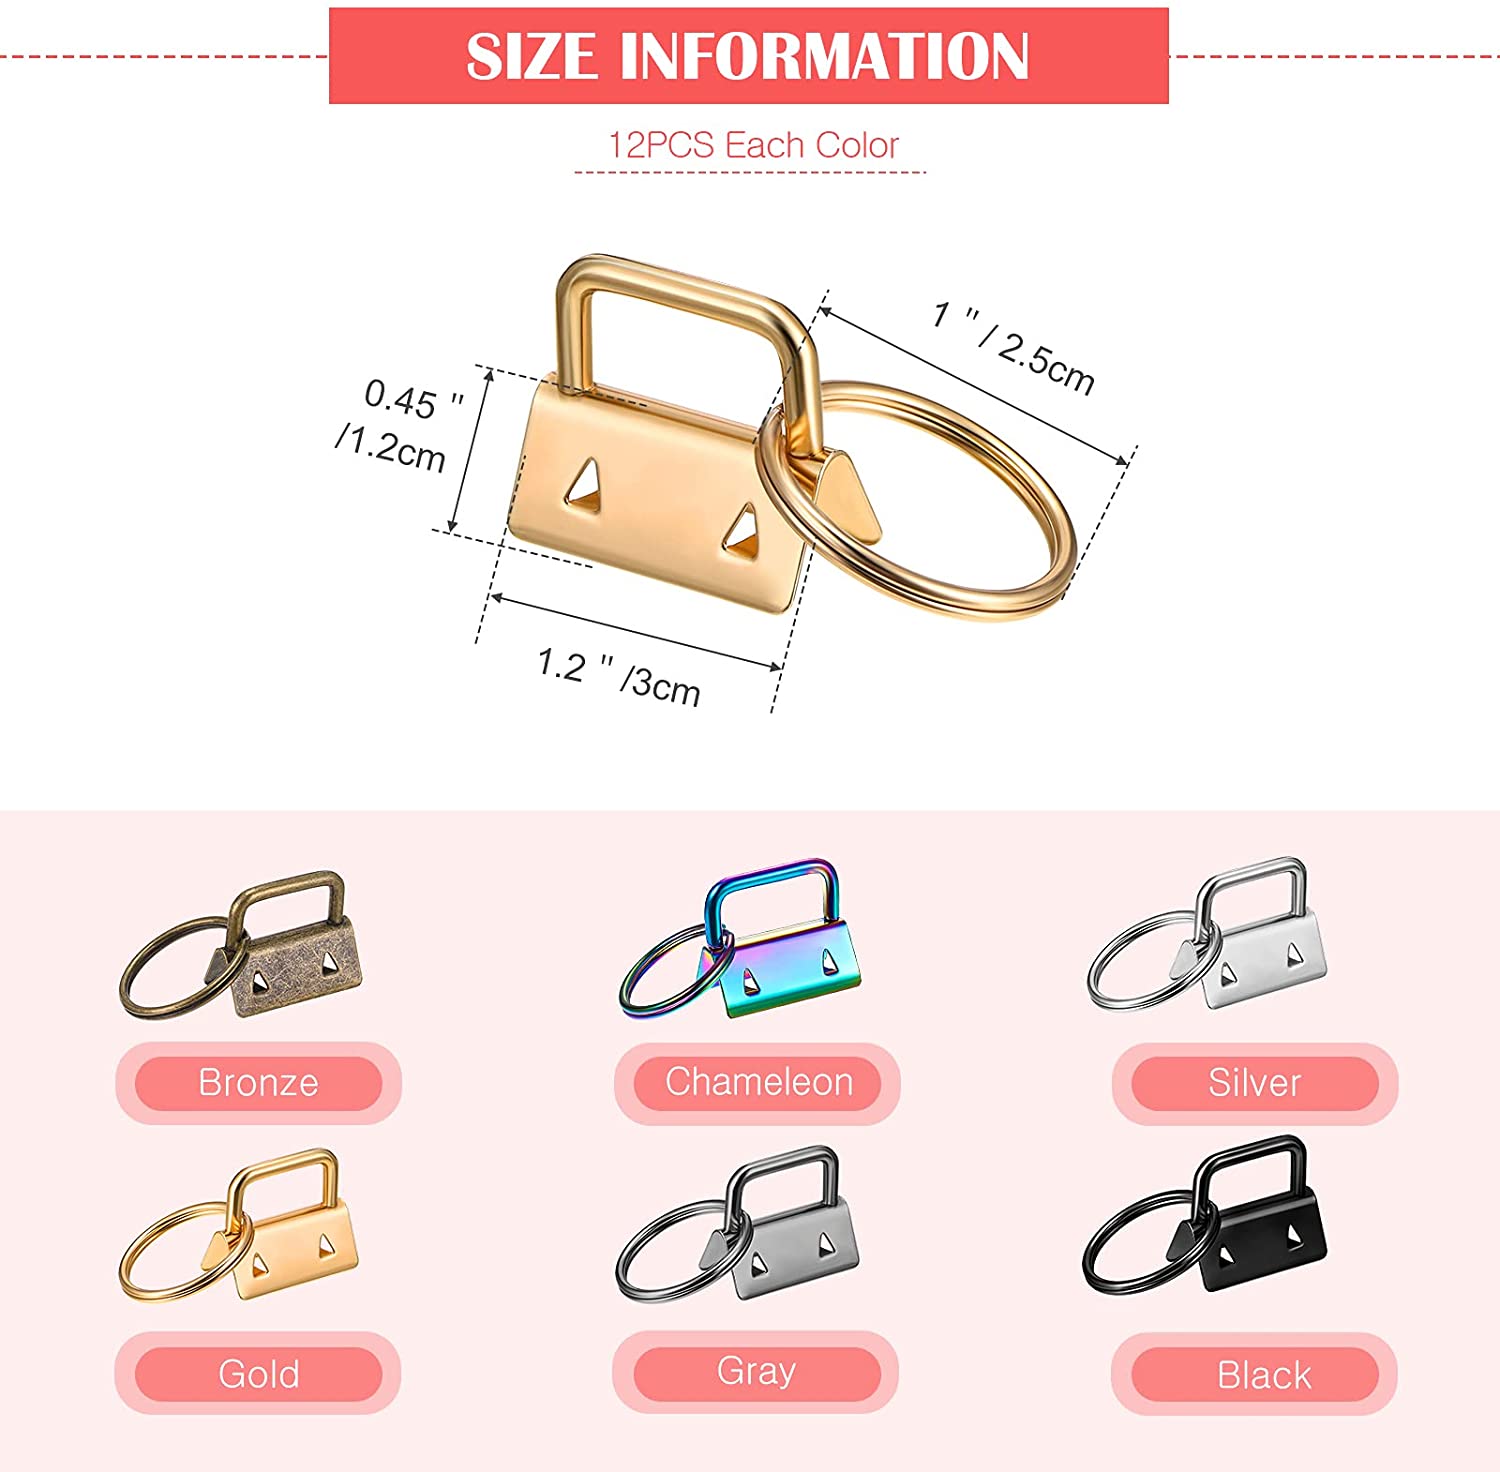 1inch Key Fob Keychain Hardware Kit DIY for Wristlet Clamp Bag Cell Phone Docorate Wallet Key Lanyard Making Install Easy